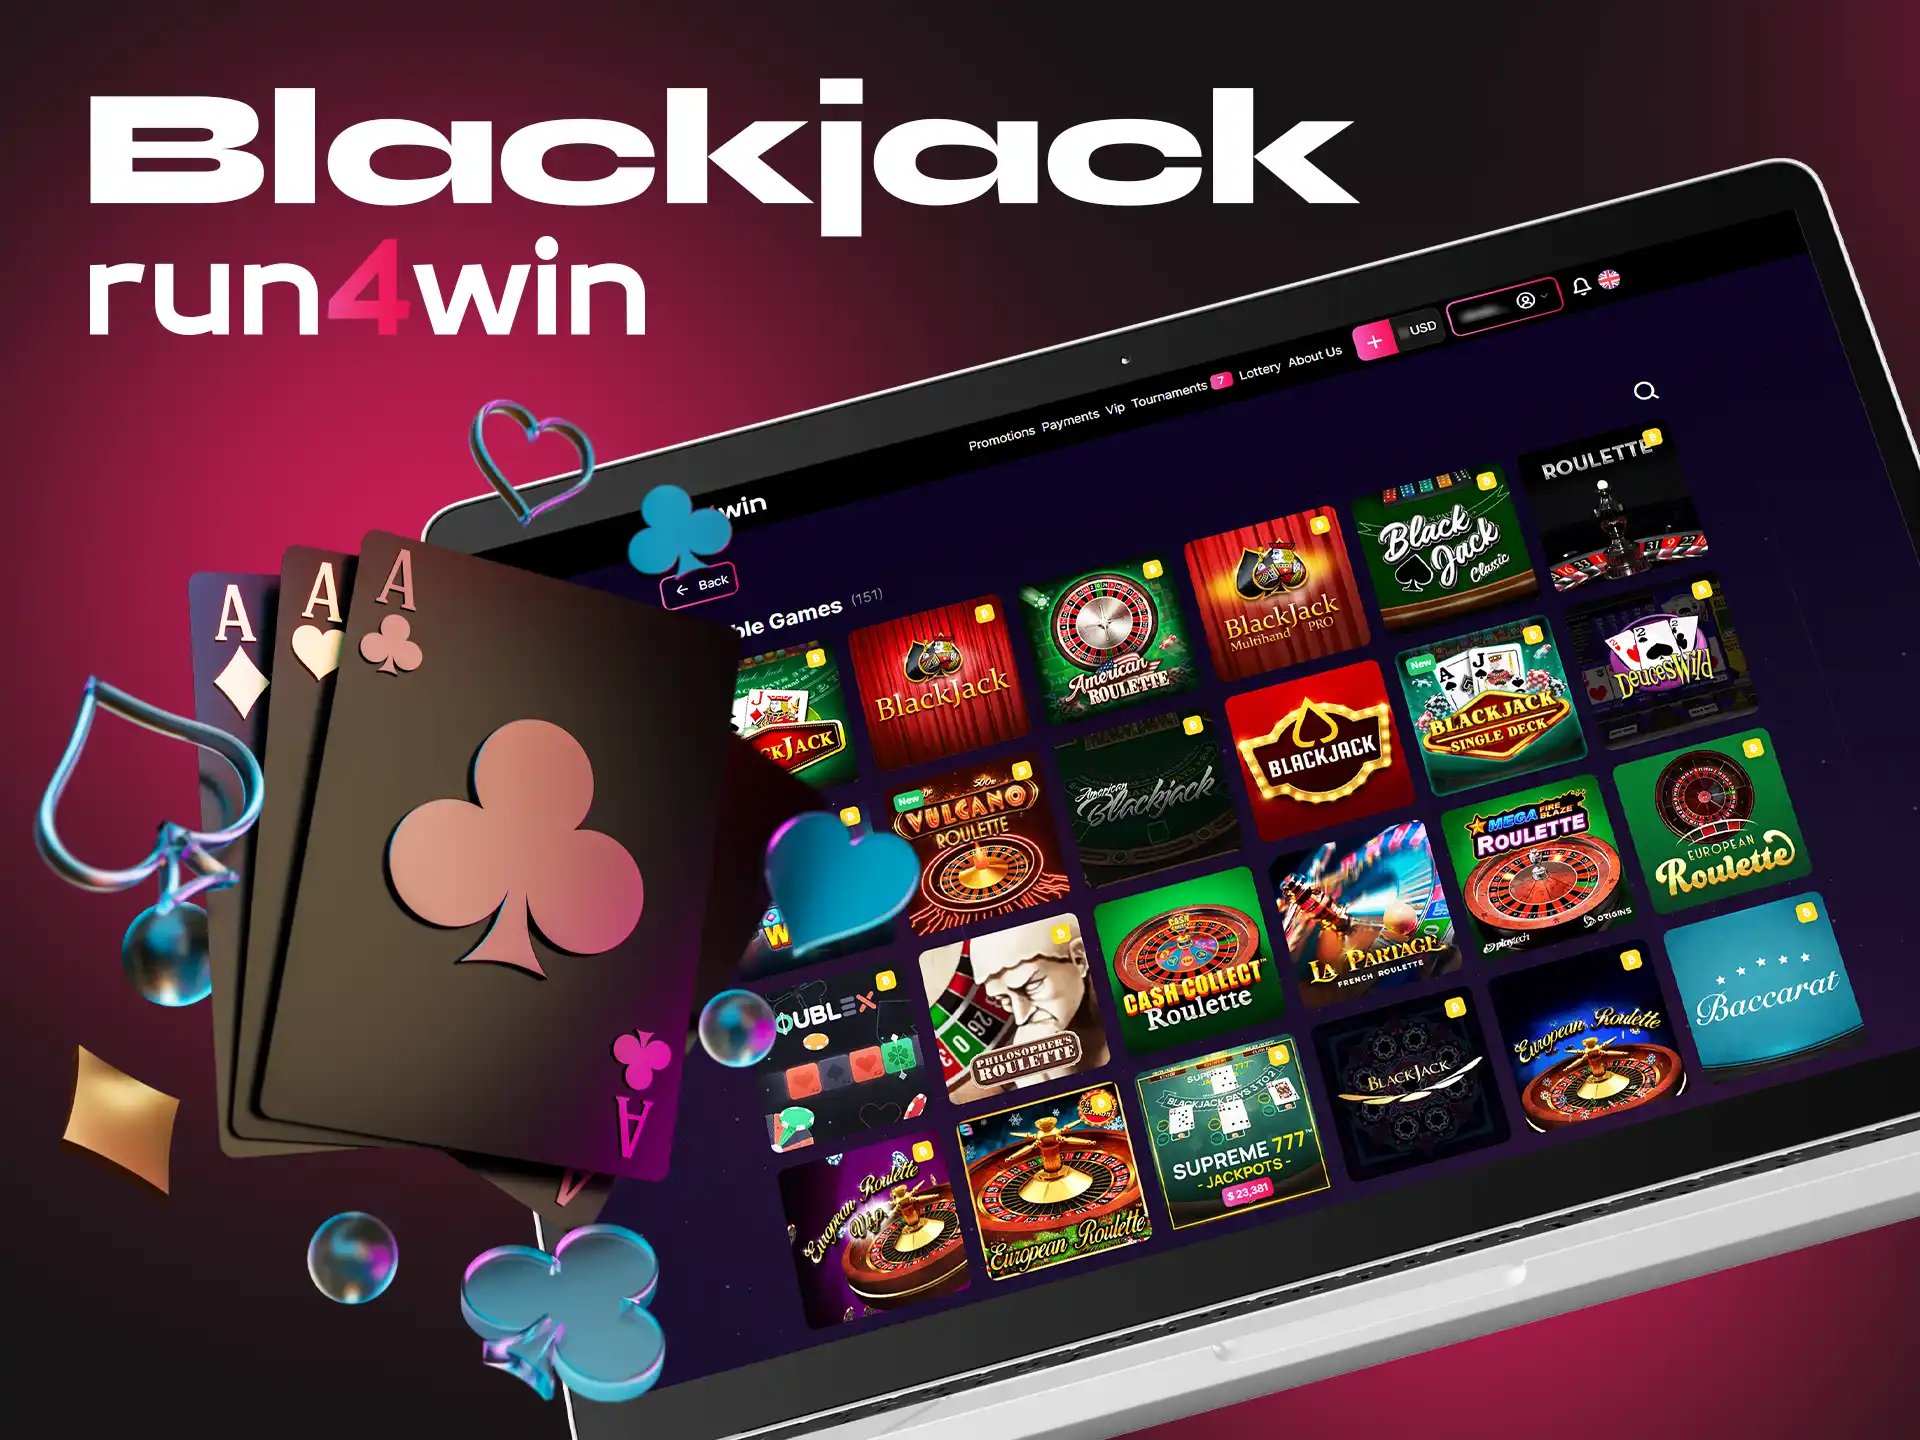 For fans of the blackjack game, Run4Win offers dozens of tables.